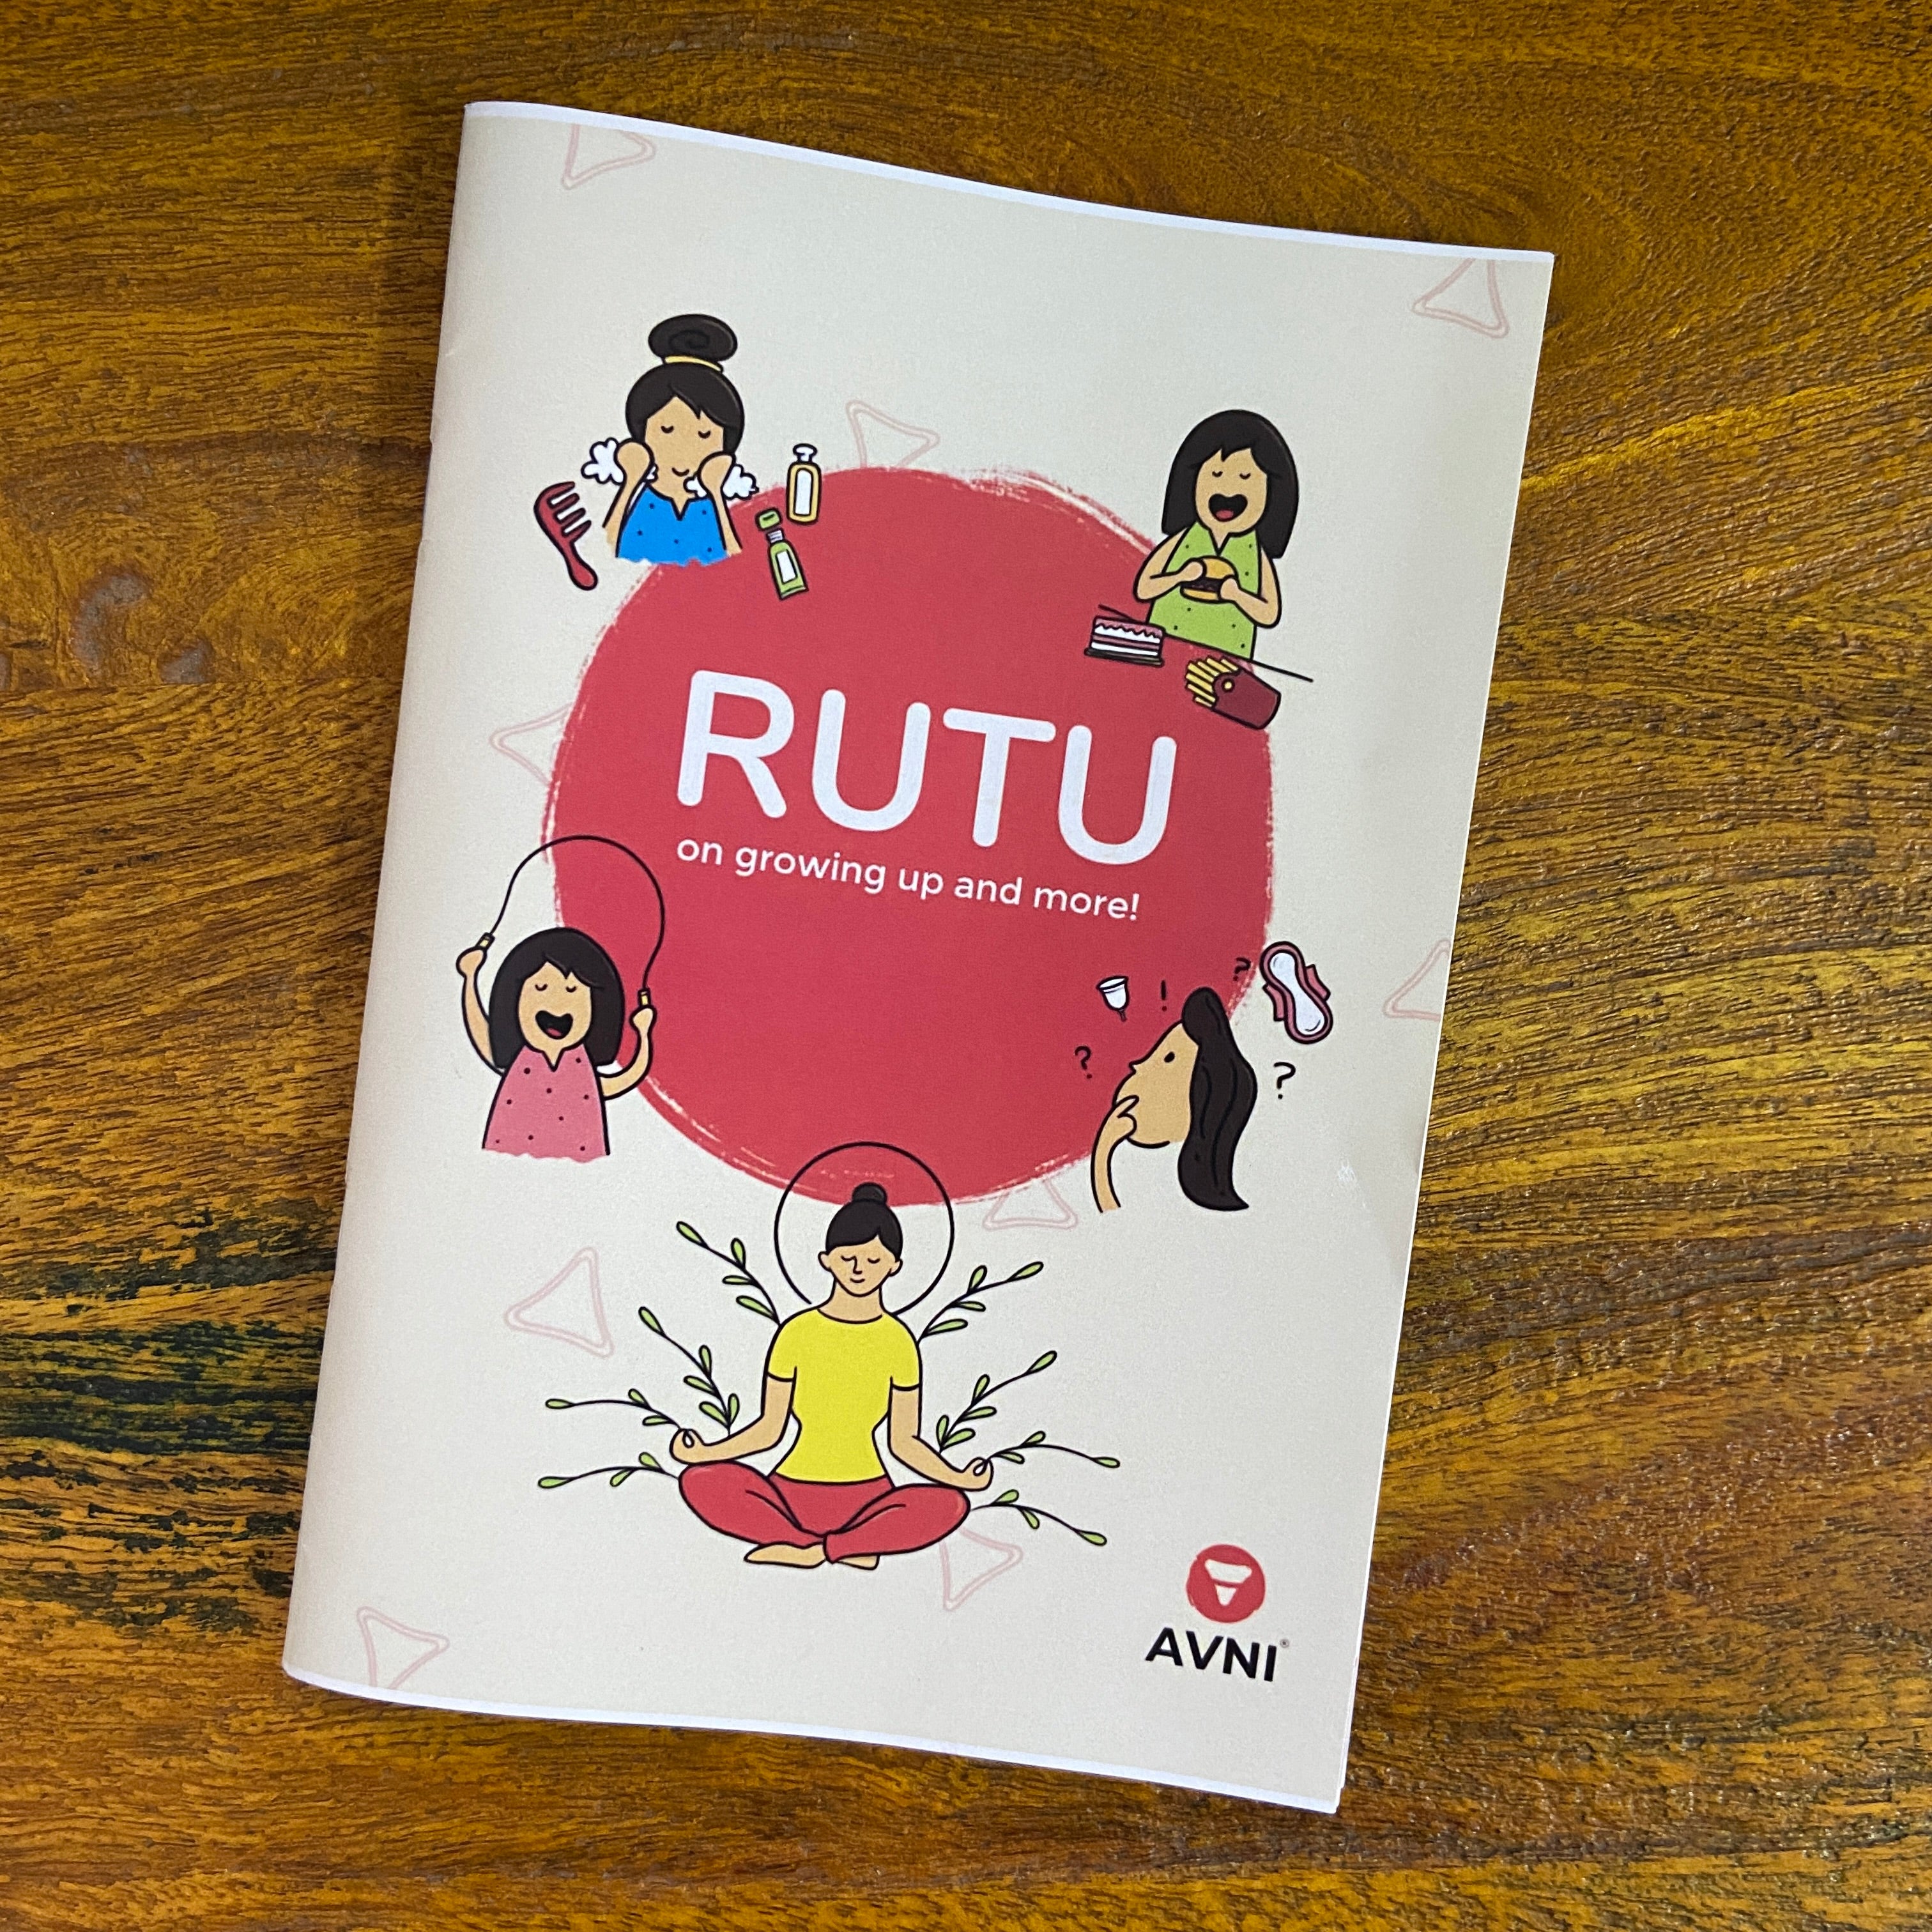 My First Period Book RUTU, Illustrative on growing up and more